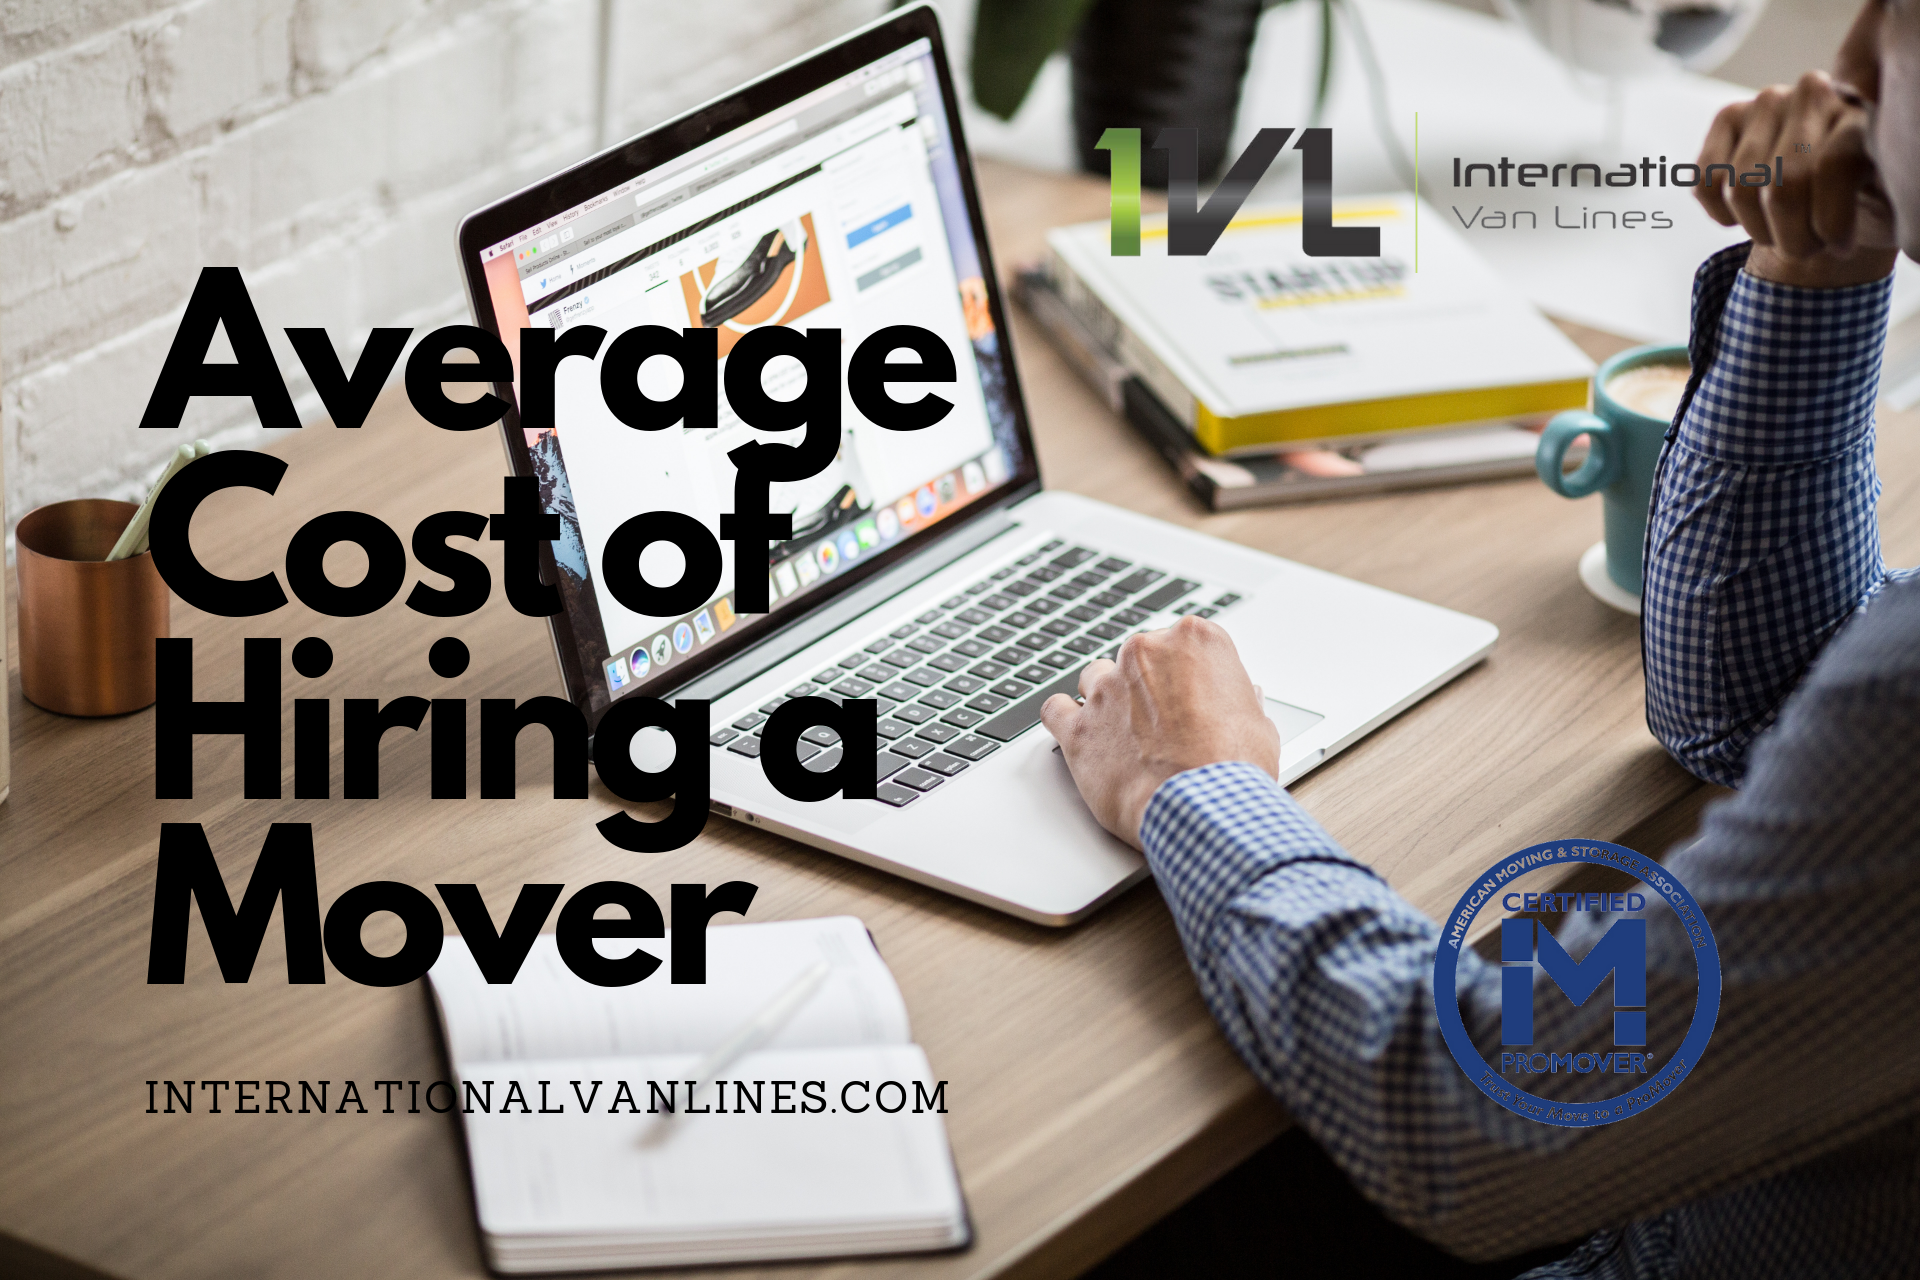 Average cost of hiring a mover